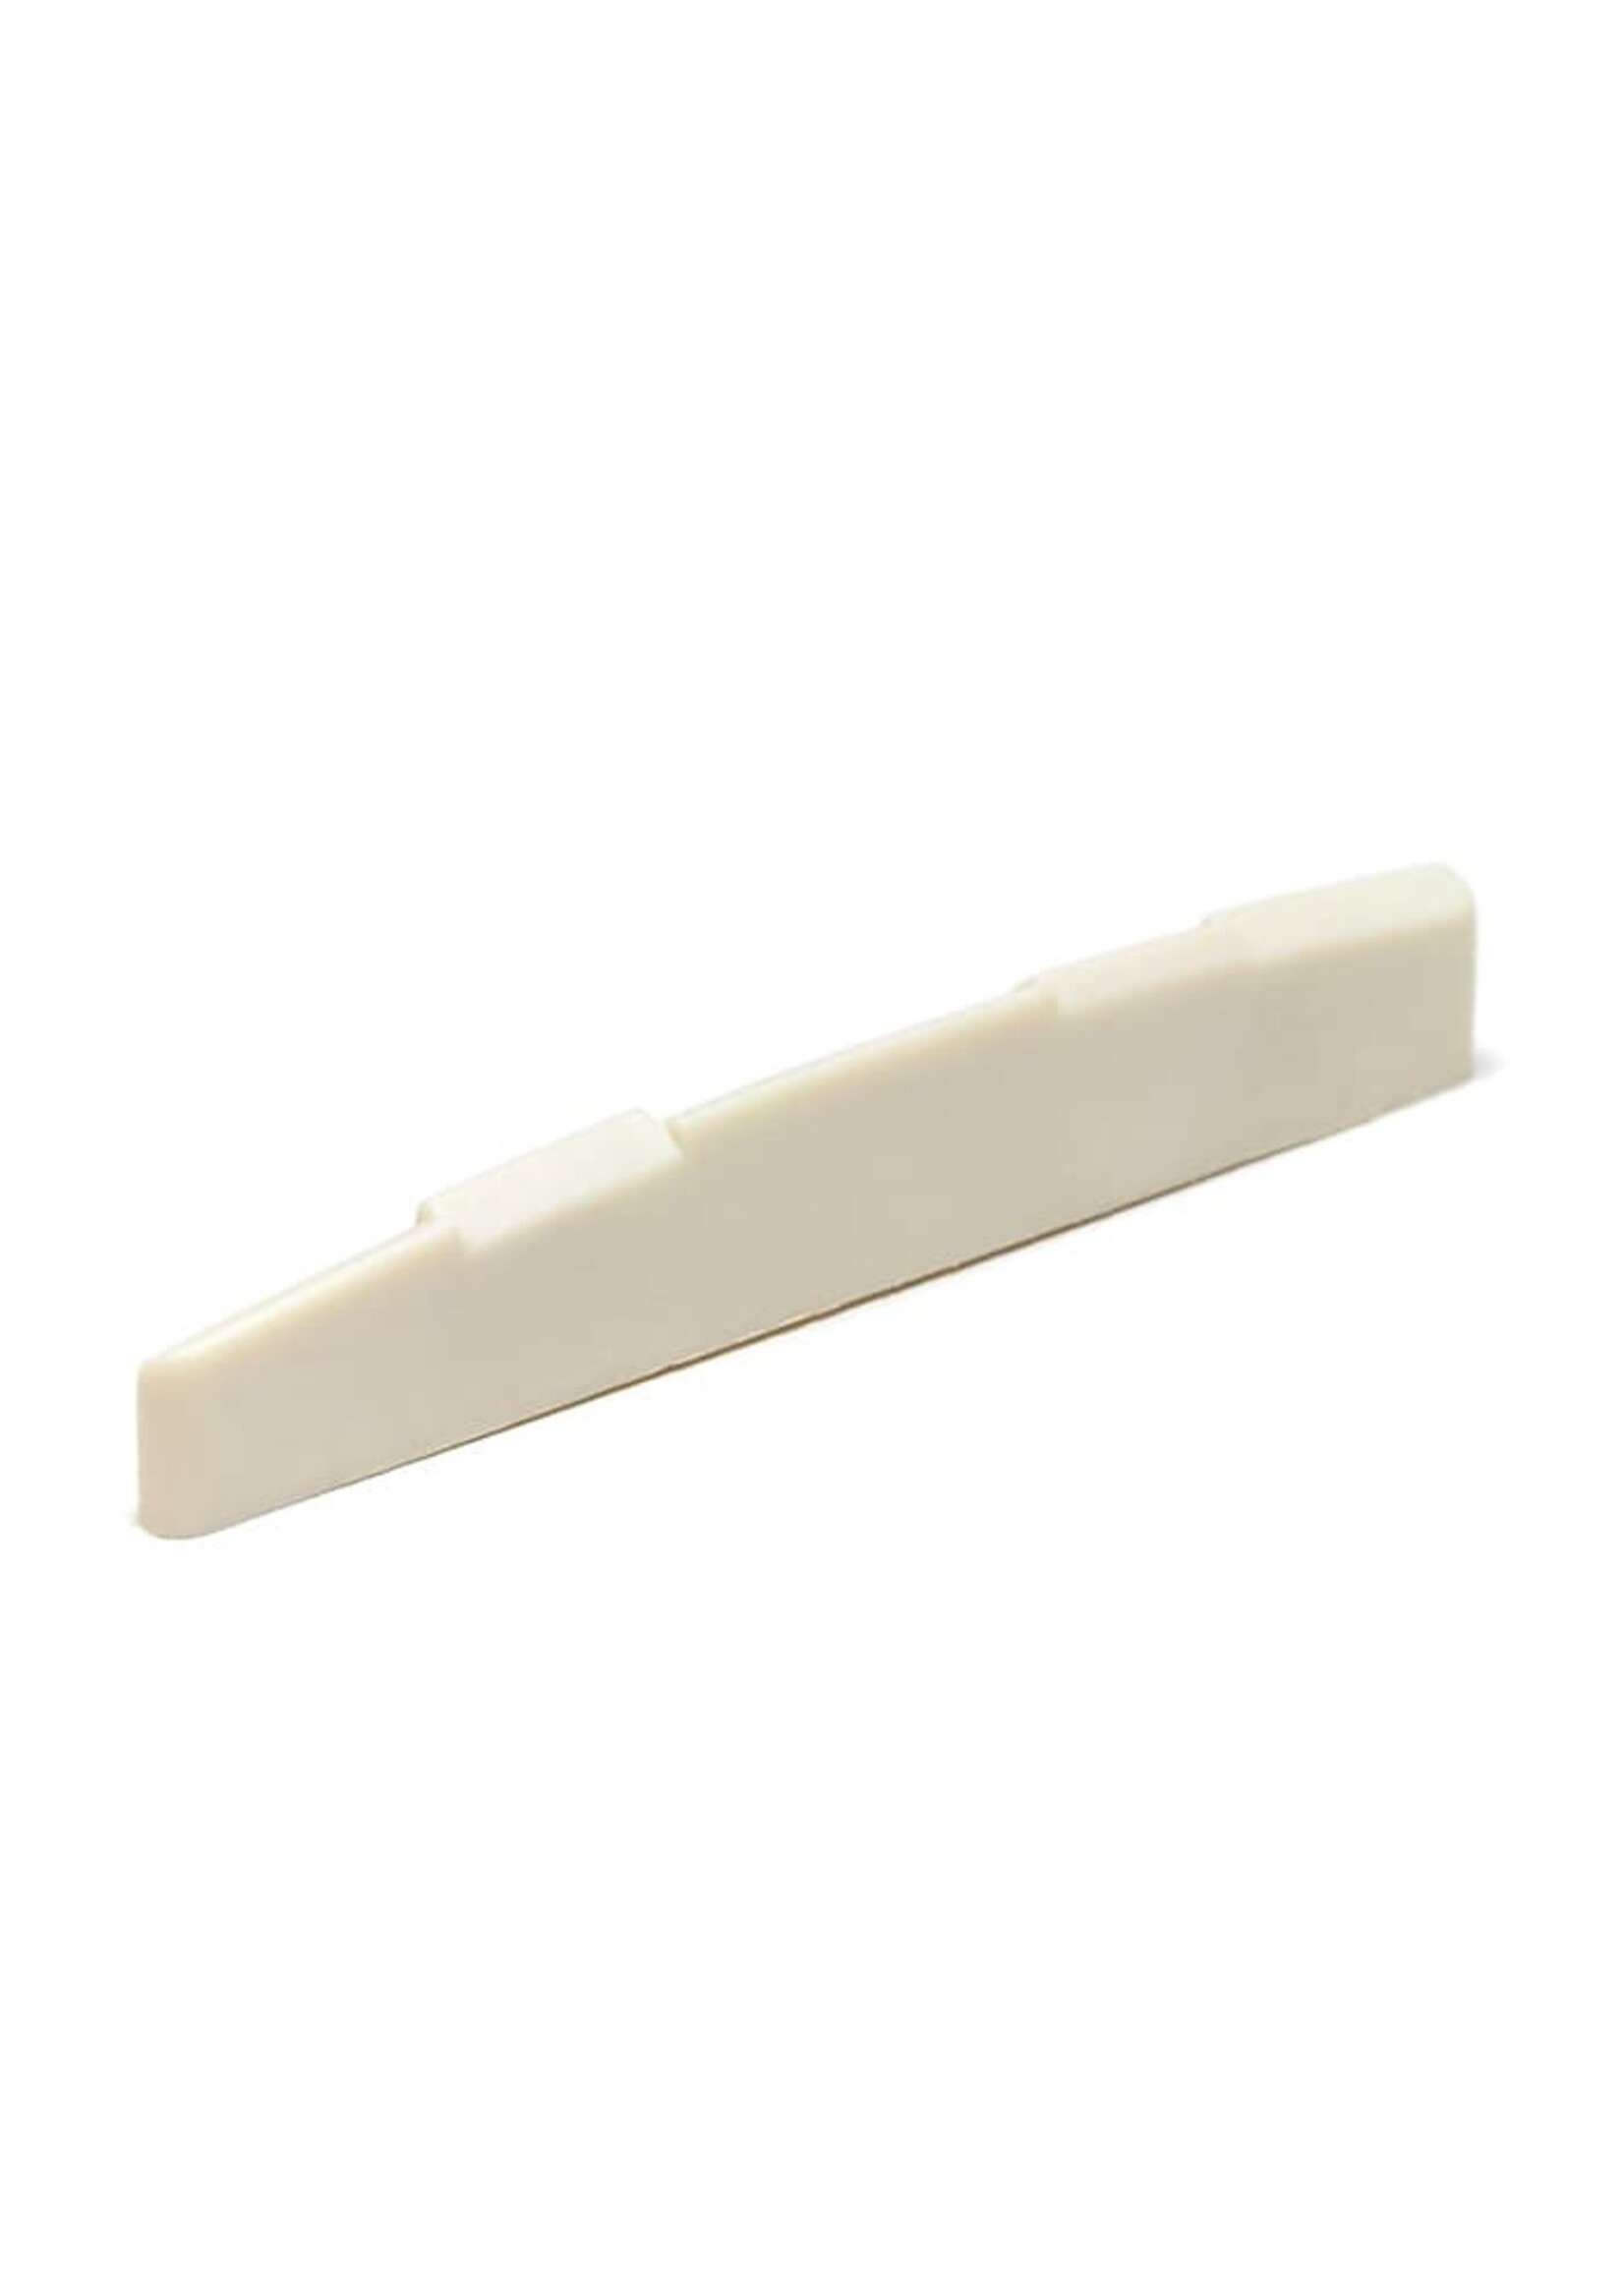 GraphTech Graph Tech TUSQ Fully Compensated Saddle 1/8" Ivory